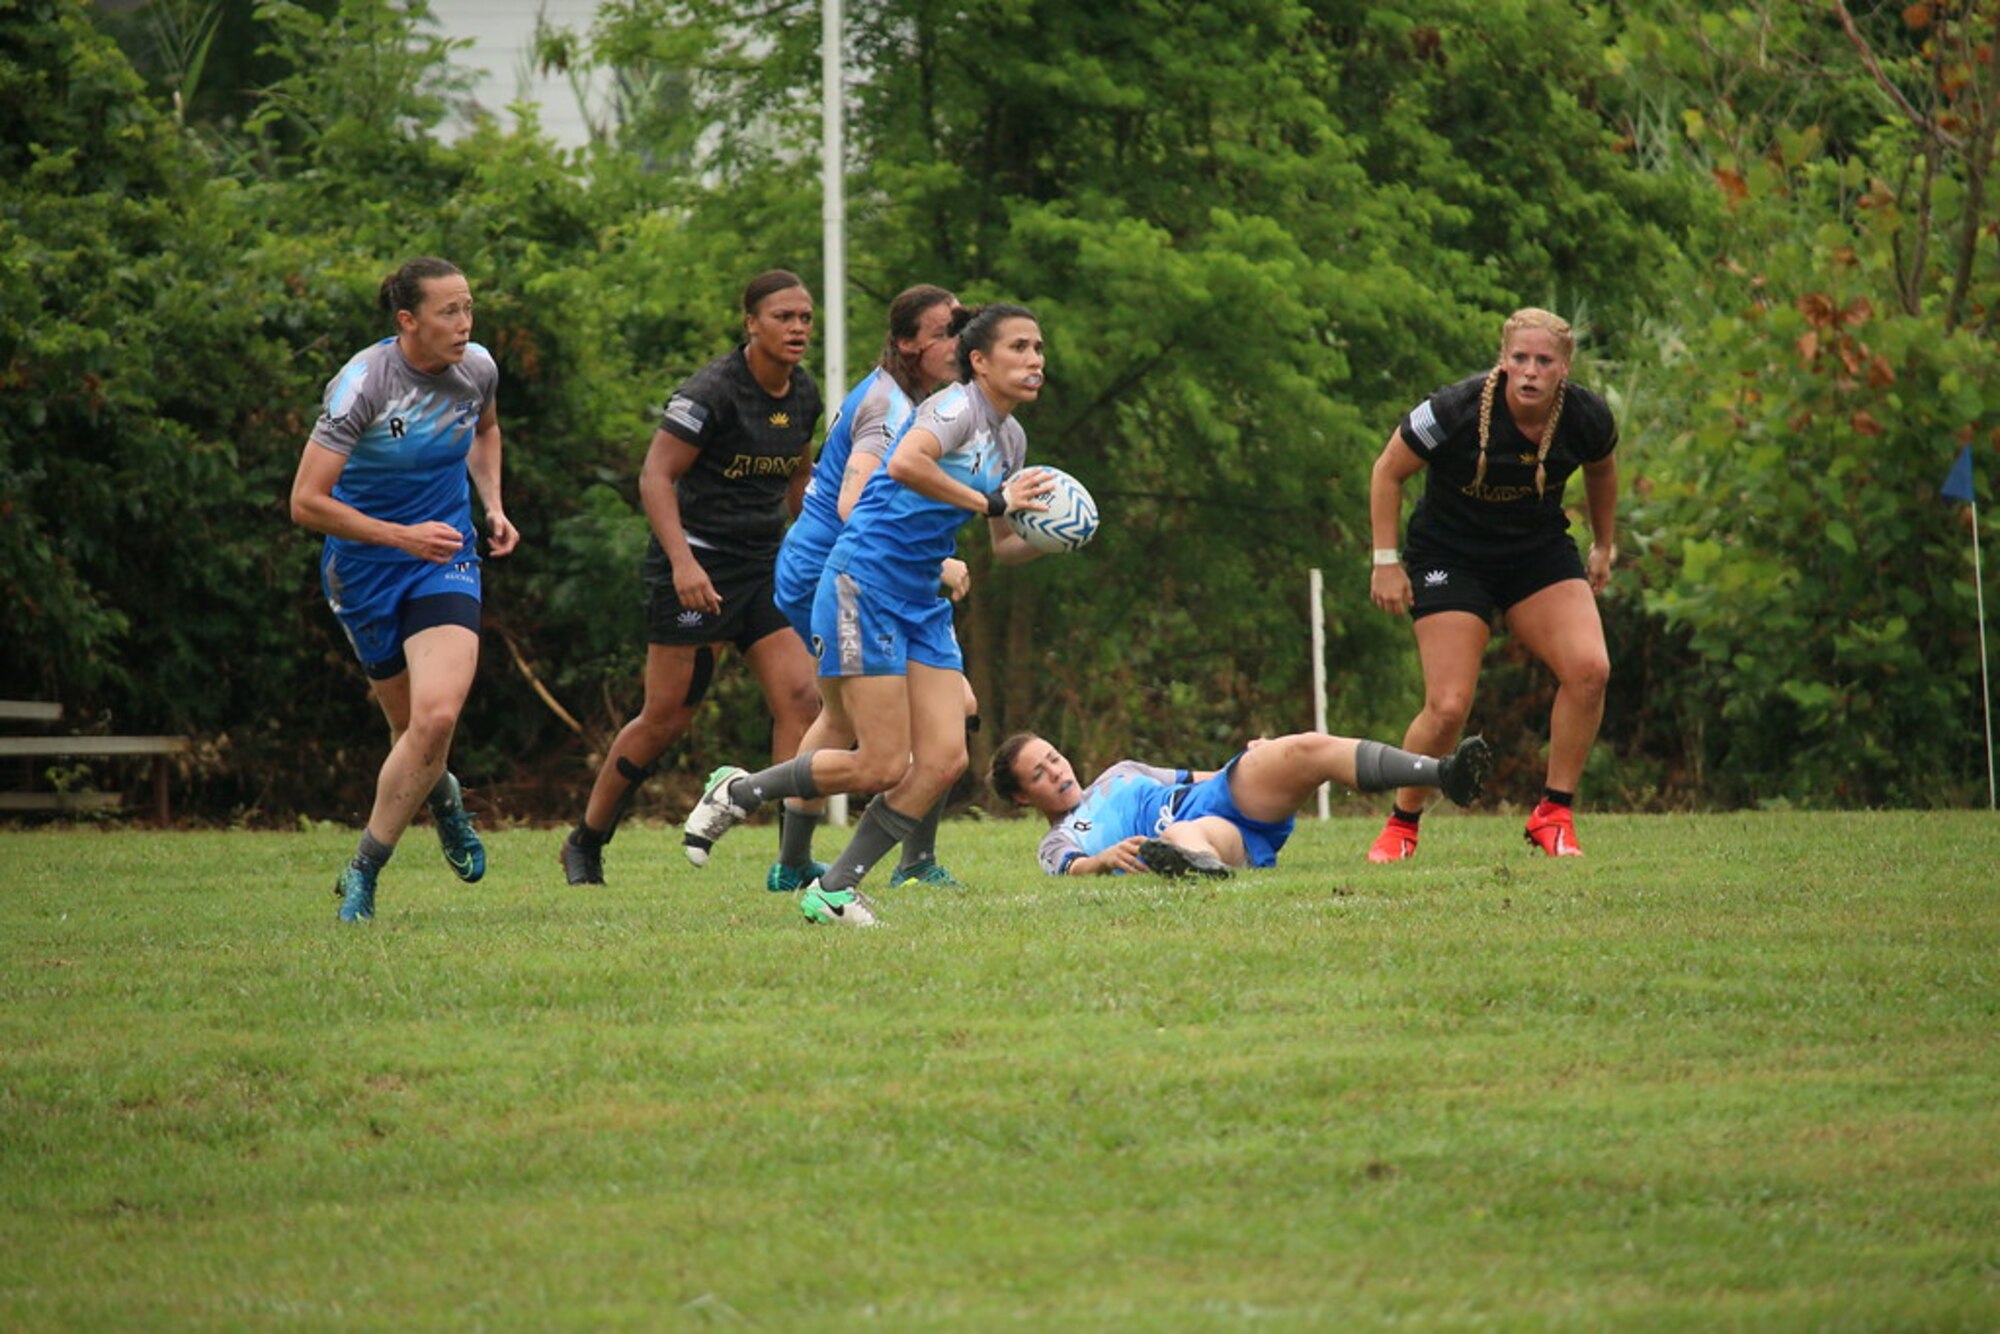 Dyess Airmen plays rugby against Army